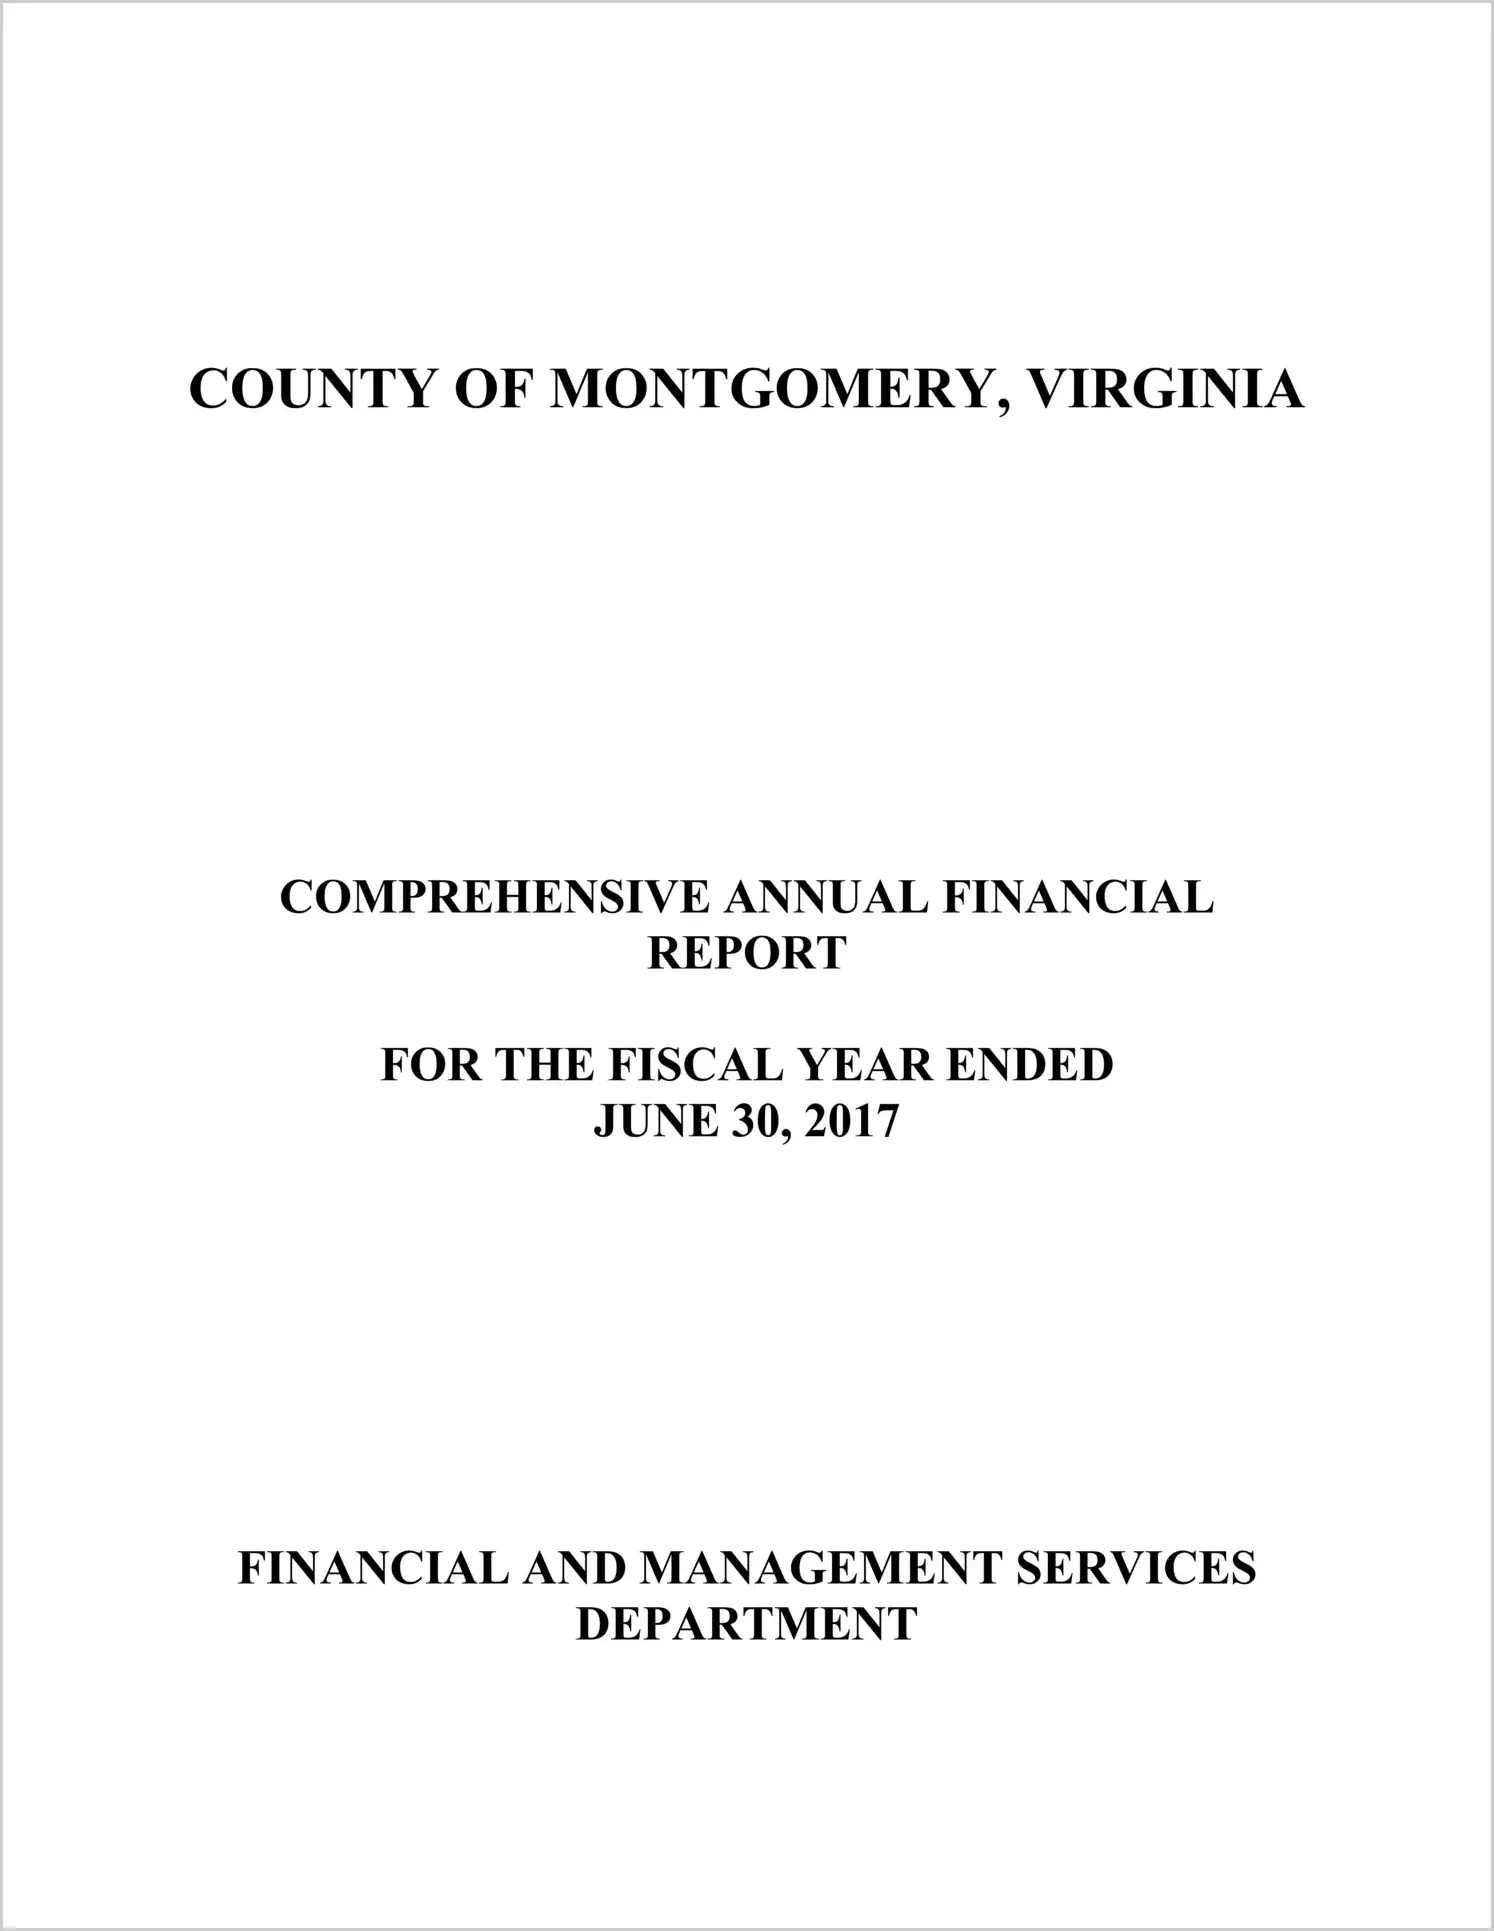 2017 Annual Financial Report for County of Montgomery